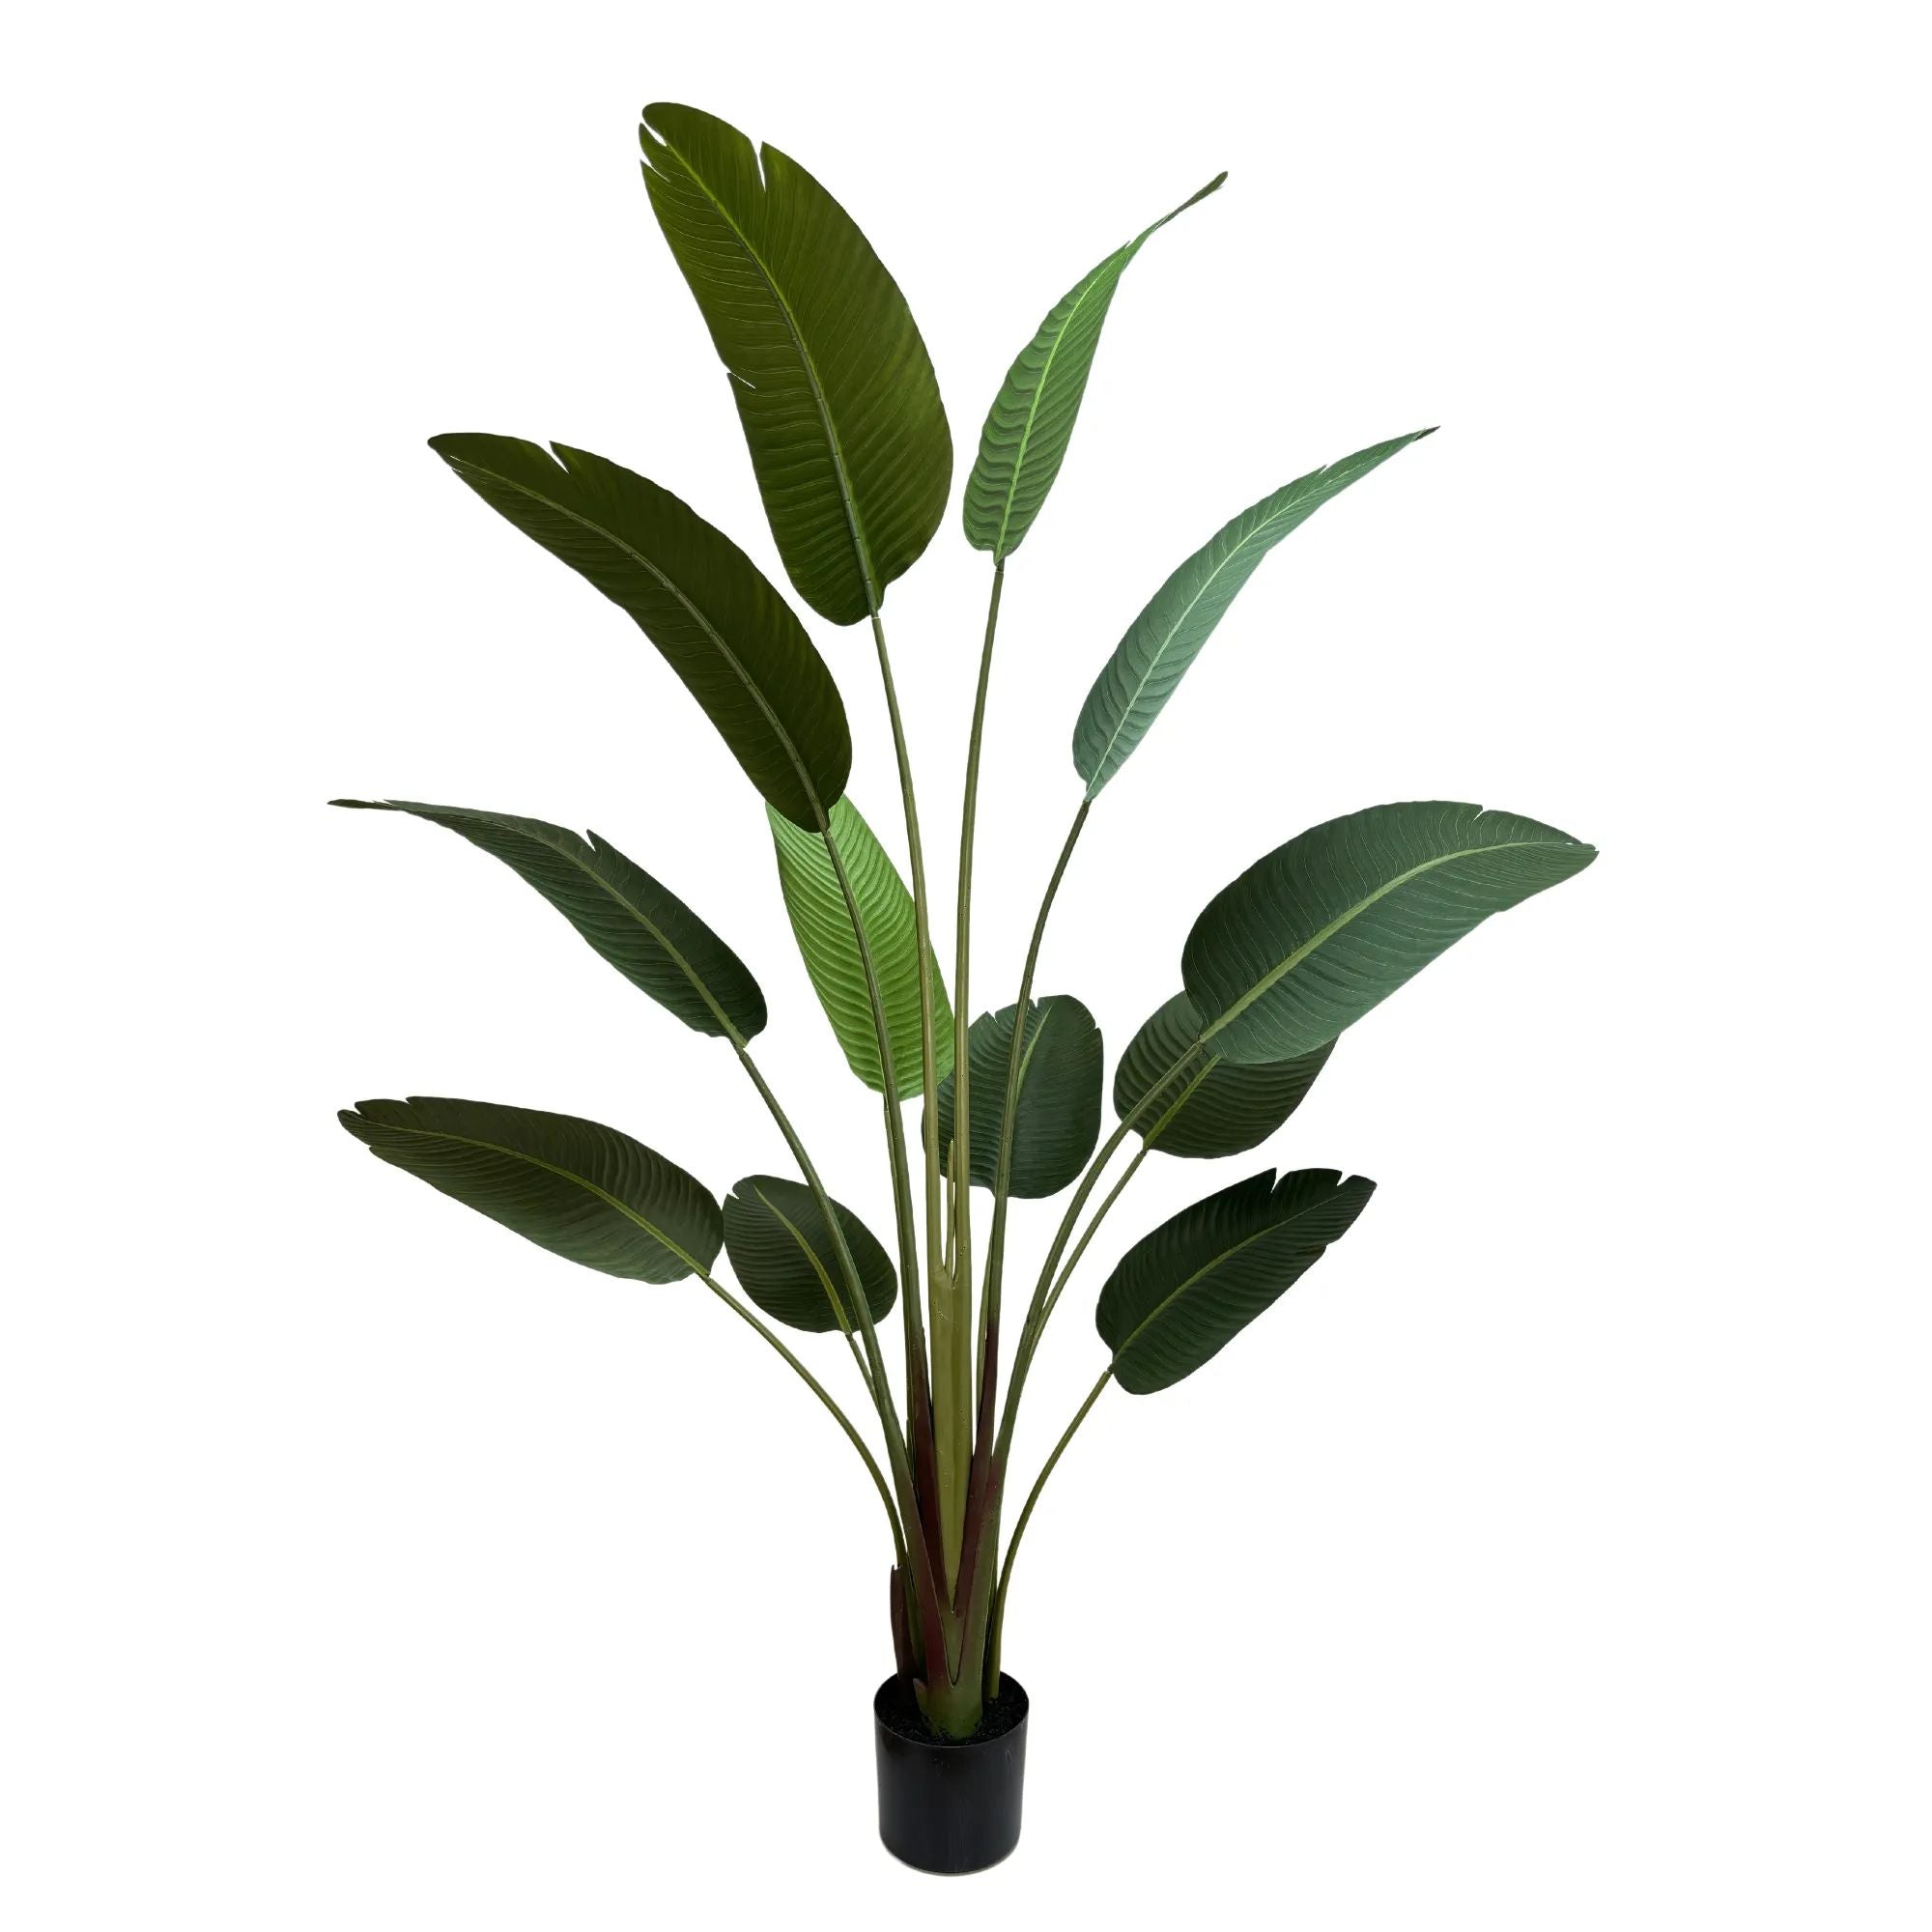 Grand Artificial Potted Travellers Palm (Banana Palm Tree) 180cm - Designer Vertical Gardens artificial shrubs Artificial Shrubs and Small plants